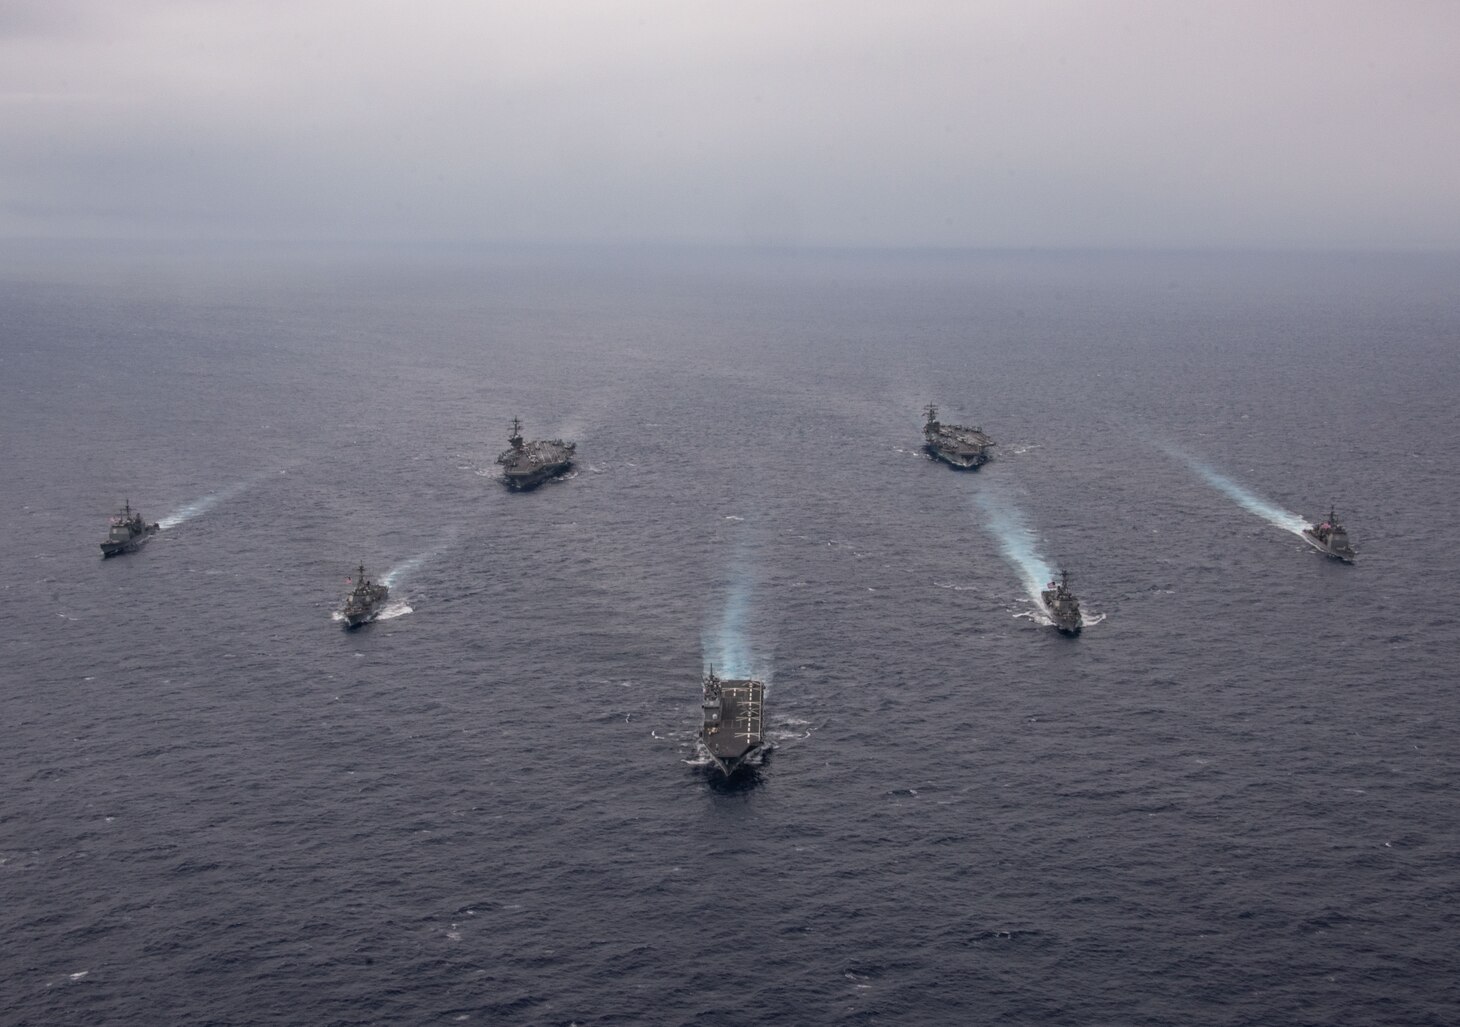 PHILIPPINE SEA (Nov. 7, 2023) Nimitz-class aircraft carriers, USS Ronald Reagan (CVN 76) and USS Carl Vinson (CVN 70), steam in formation with Japan Maritime Self-Defense Force (JMSDF) first-in-class helicopter destroyer, JS Hyuga (DDH 181), Ticonderoga-class guided-missile cruisers, USS Antietam (CG 54) and USS Robert Smalls (CG 62), and Arleigh Burke-class guided-missile destroyers, USS Sterett (DDG 104) and USS Kidd (DDG 100), during the Multi-Large Deck Exercise (MLDE) in the Philippine Sea, Nov. 7. Ronald Reagan is participating in the bilateral MLDE, which features the ships and aircraft of JMSDF Escort Flotilla 3, as well as the U.S. Navy’s Carrier Strike Group 1 and Carrier Strike Group 5. MLDE is a multi-domain event that grows the already strong partnership and interoperability that exists between the JMSDF and U.S. Navy today. (U.S. Navy photo by Mass Communication Specialist 3rd Class Natasha ChevalierLosada)